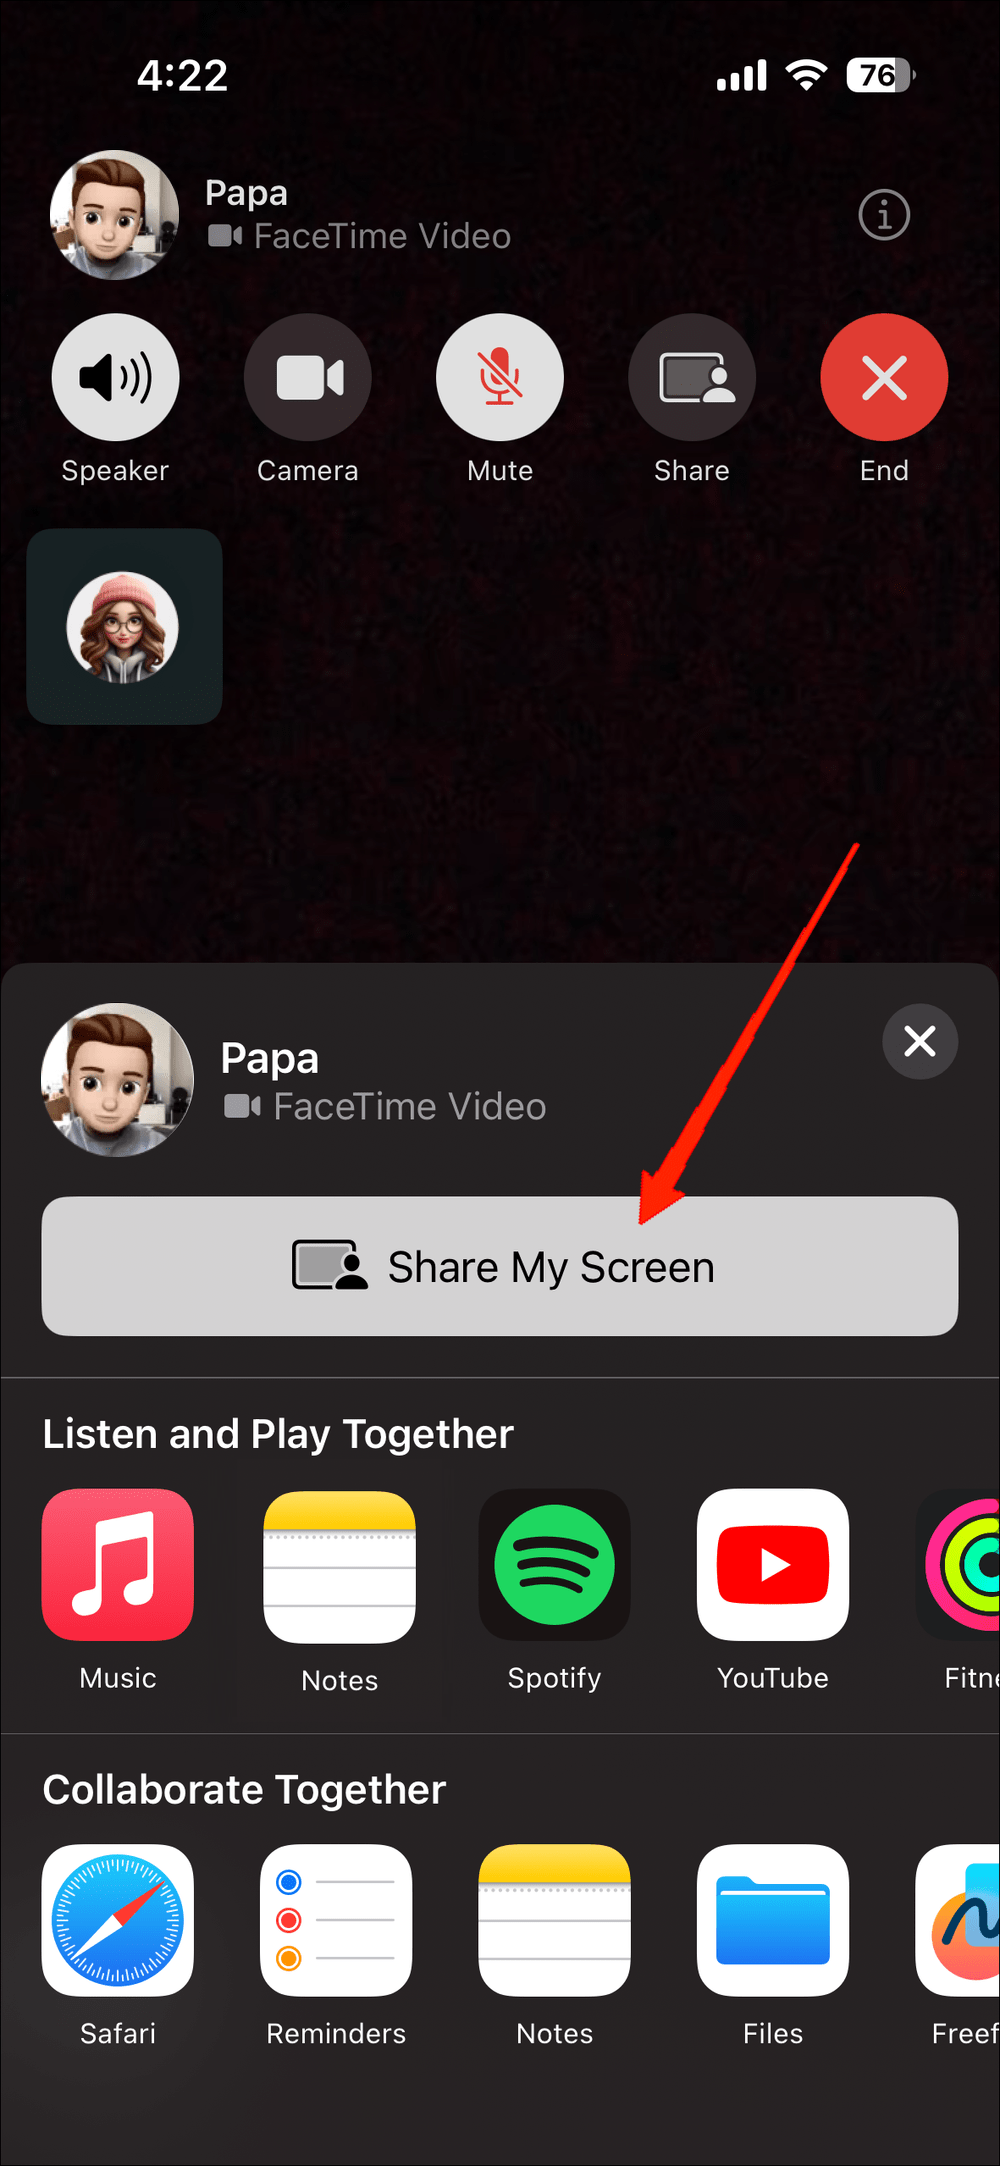 select 'Share My Screen'. This will initiate Screen Sharing in a couple of seconds.